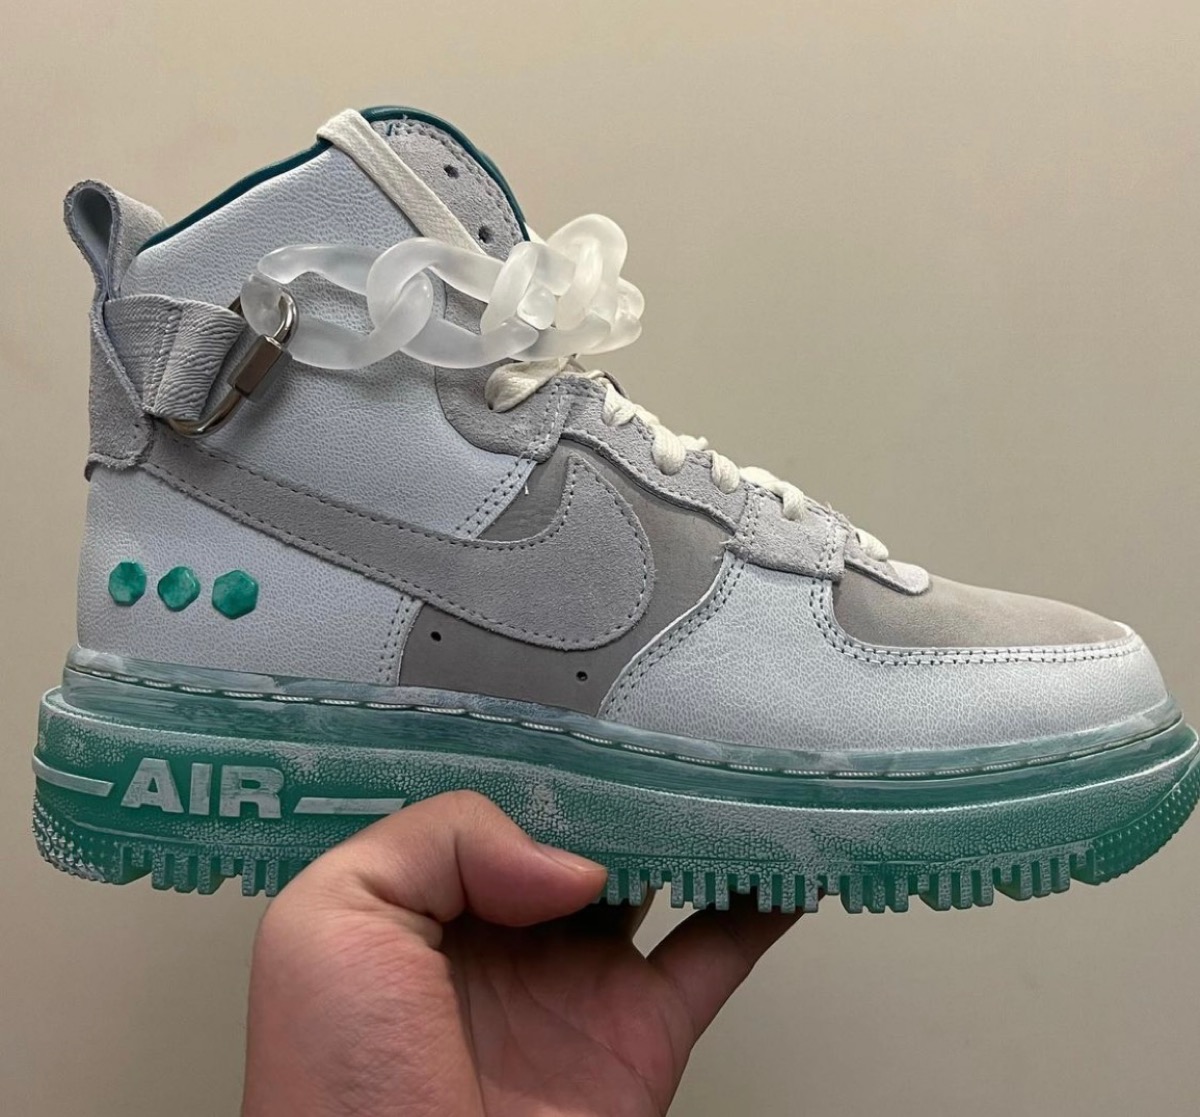 Nike Air Force 1 High Utility 2.0 Formless, Shapeless, Limitless